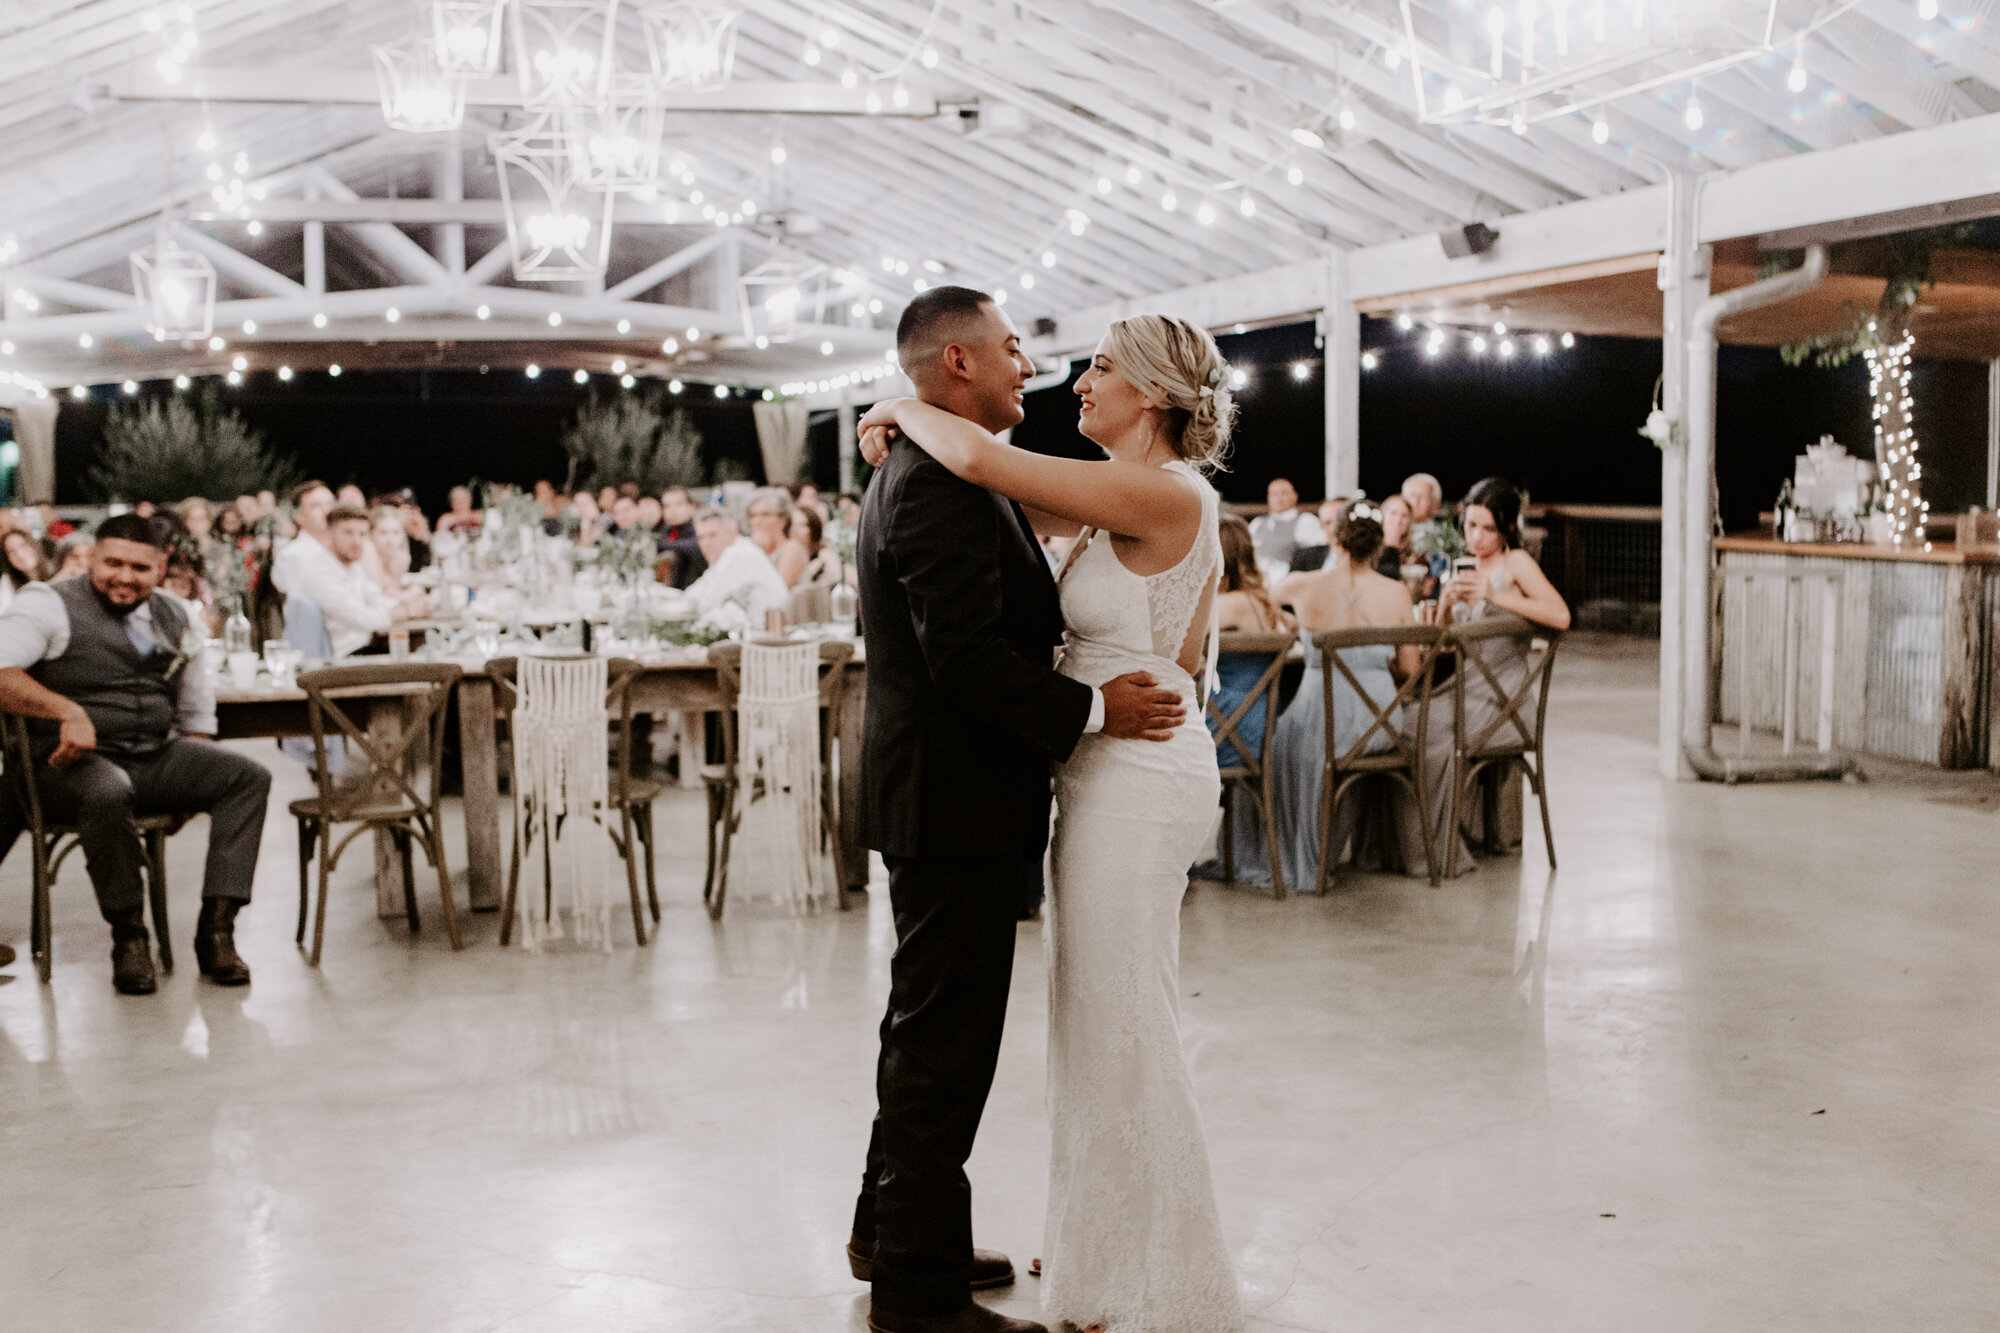 Bride and groom first dance. Radiant Bohemian Hill Country Wedding at Gruene Estate in New Braunfels, TX